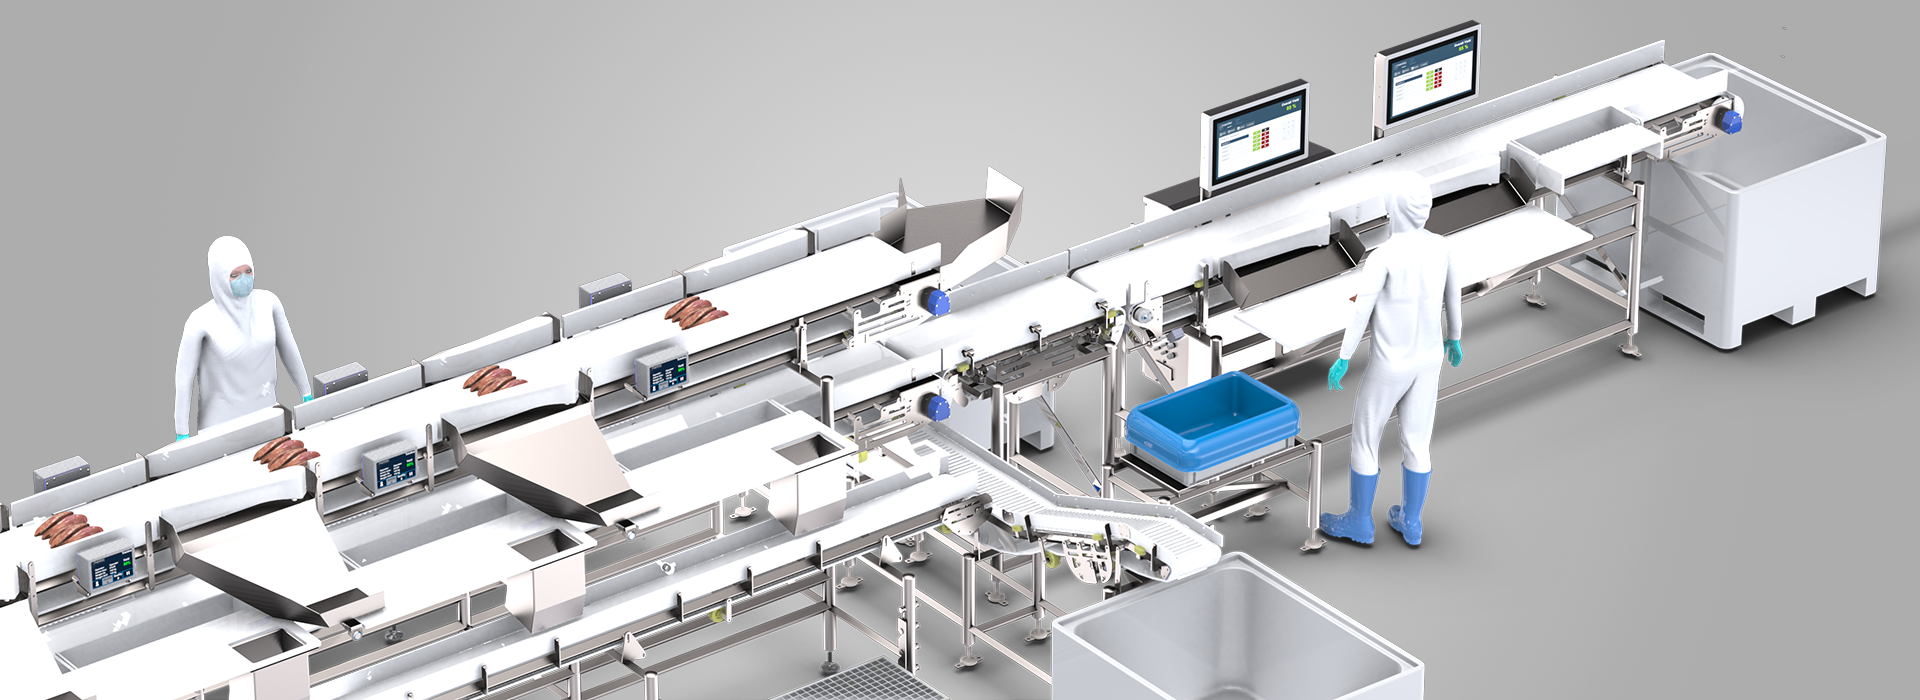 Intelligent poultry trimming line monitoring live yield, capacity, and quality per operator